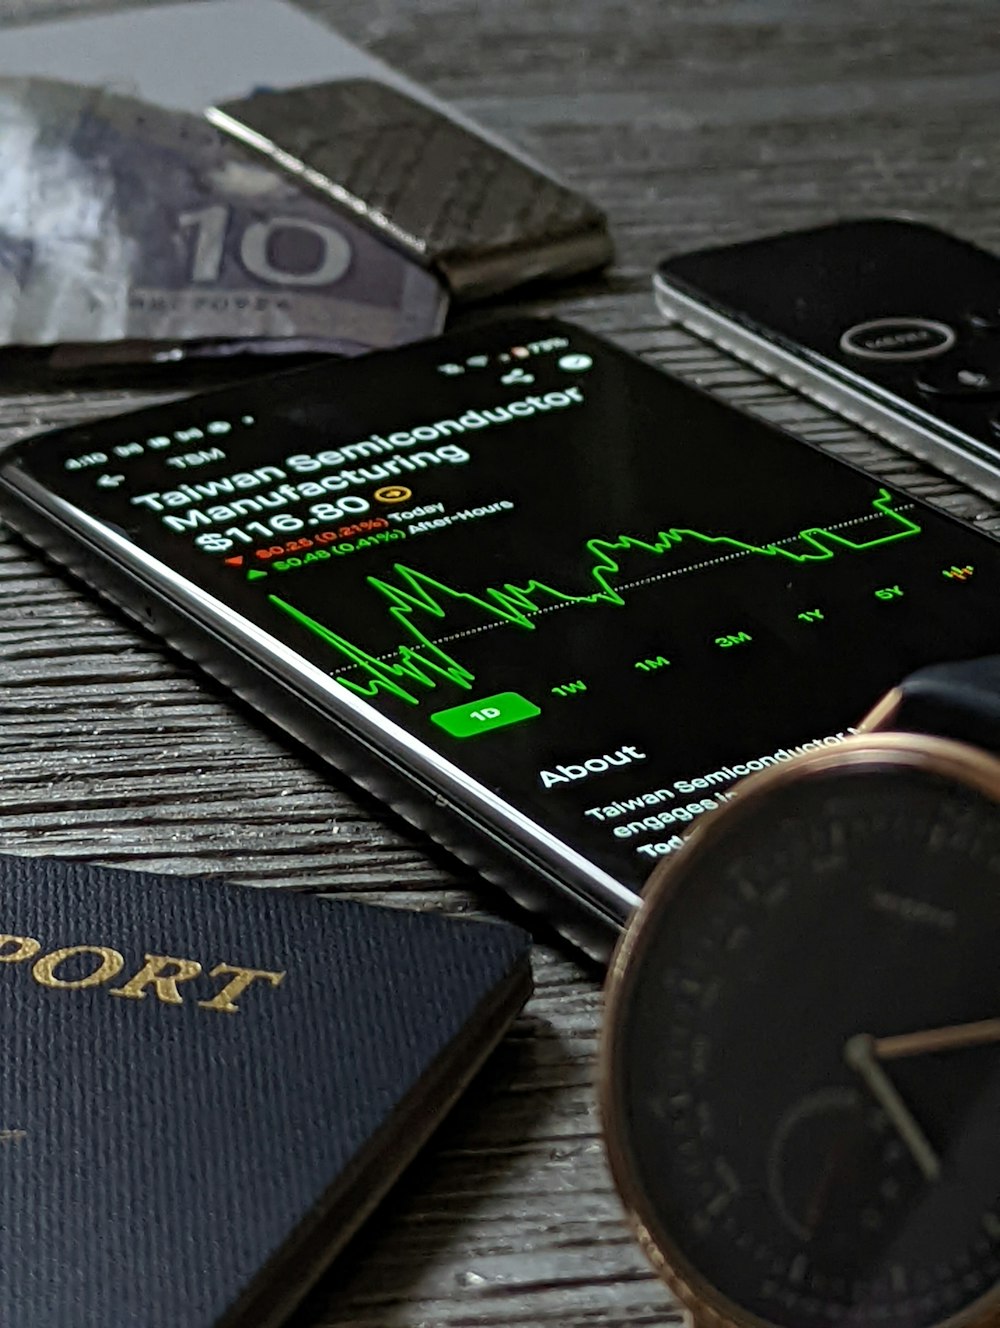 a passport, cell phone, watch and wallet on a table